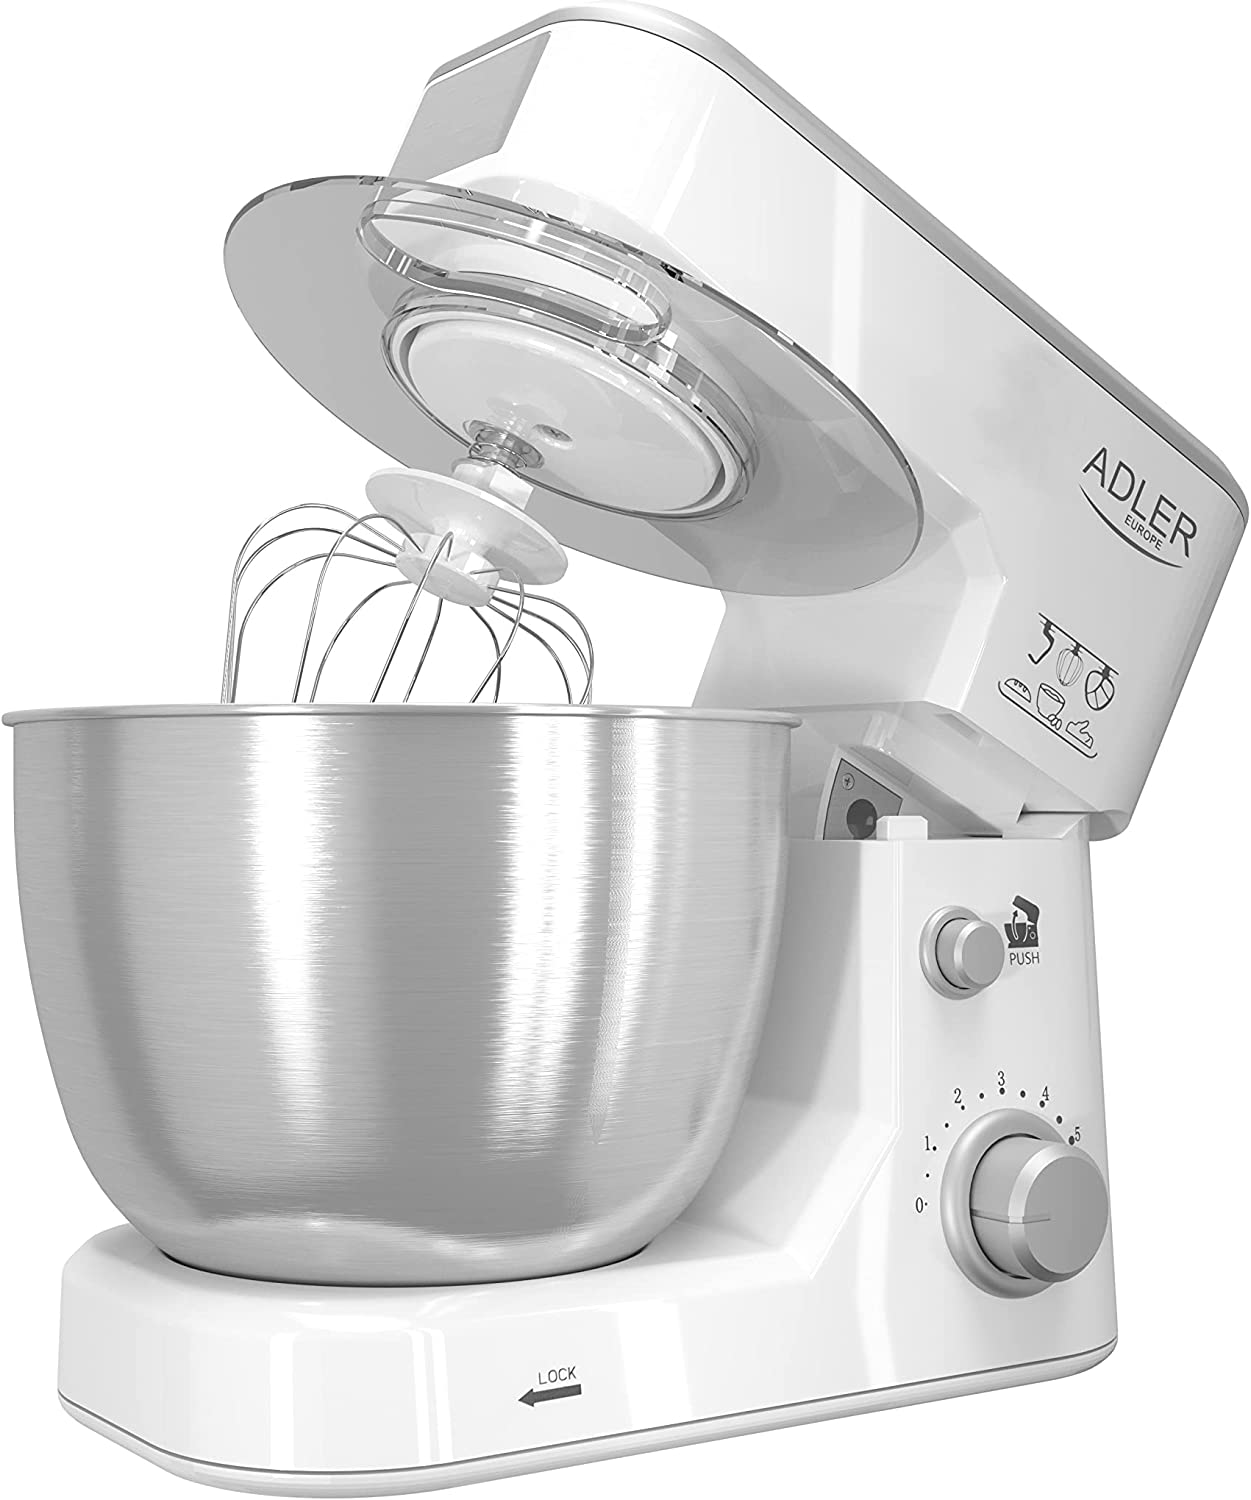 Young Adler AD4216 Food Processor, Kneading Machine, 1000 W, Stainless Steel Bowl 4 L, 6 Levels, Mixing Machine with Dough Hook, Whisk, Whisk